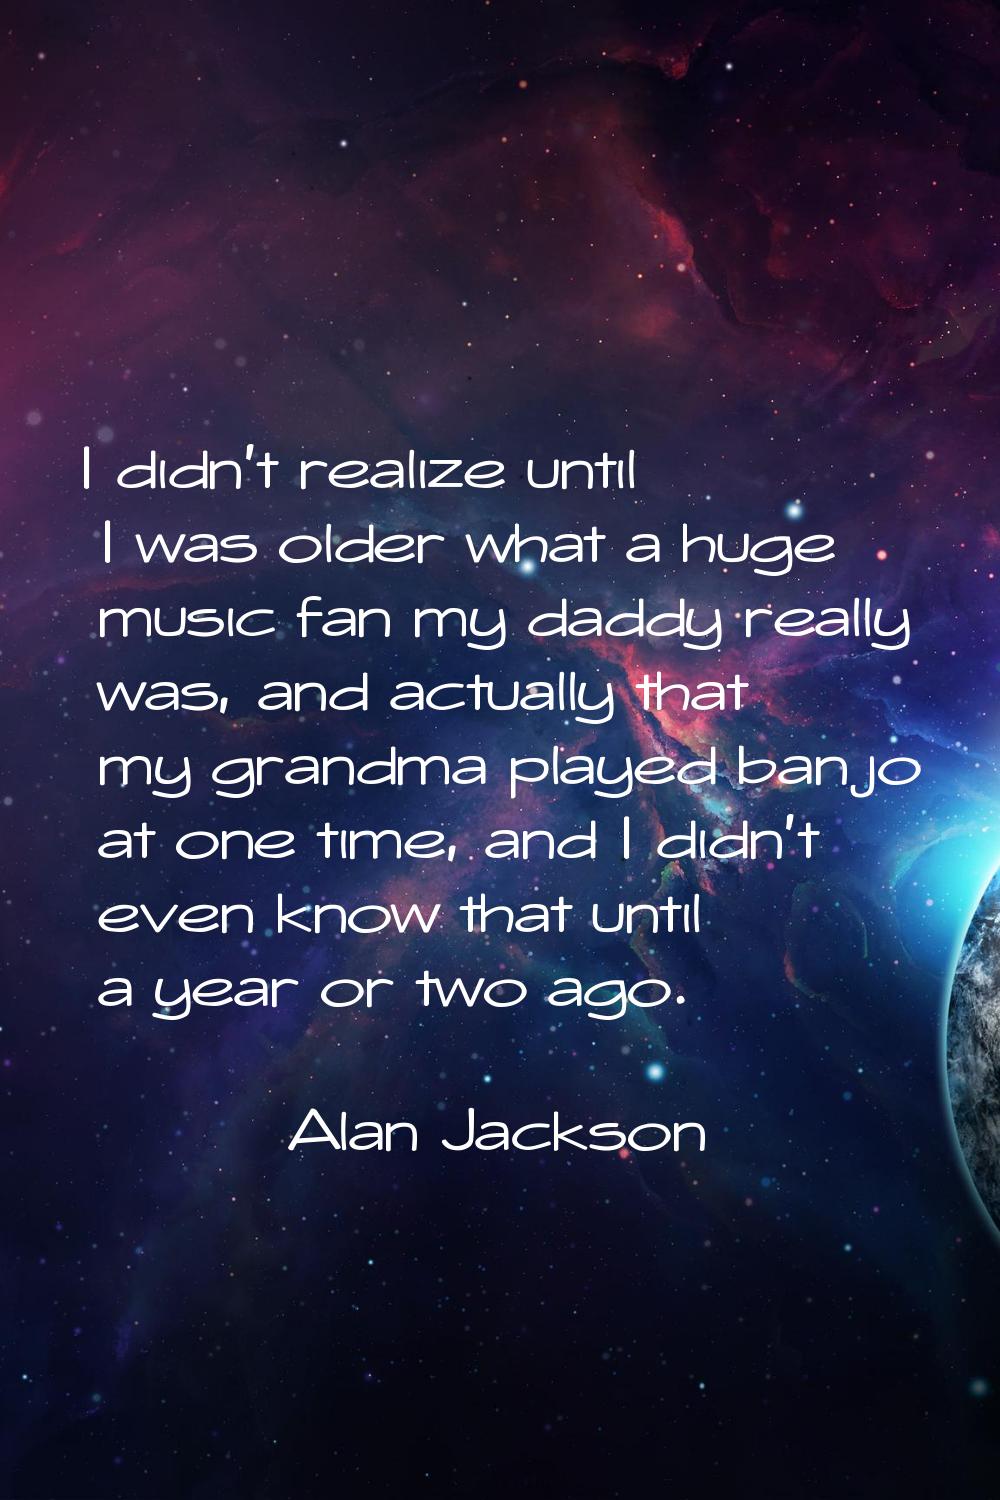 I didn't realize until I was older what a huge music fan my daddy really was, and actually that my 